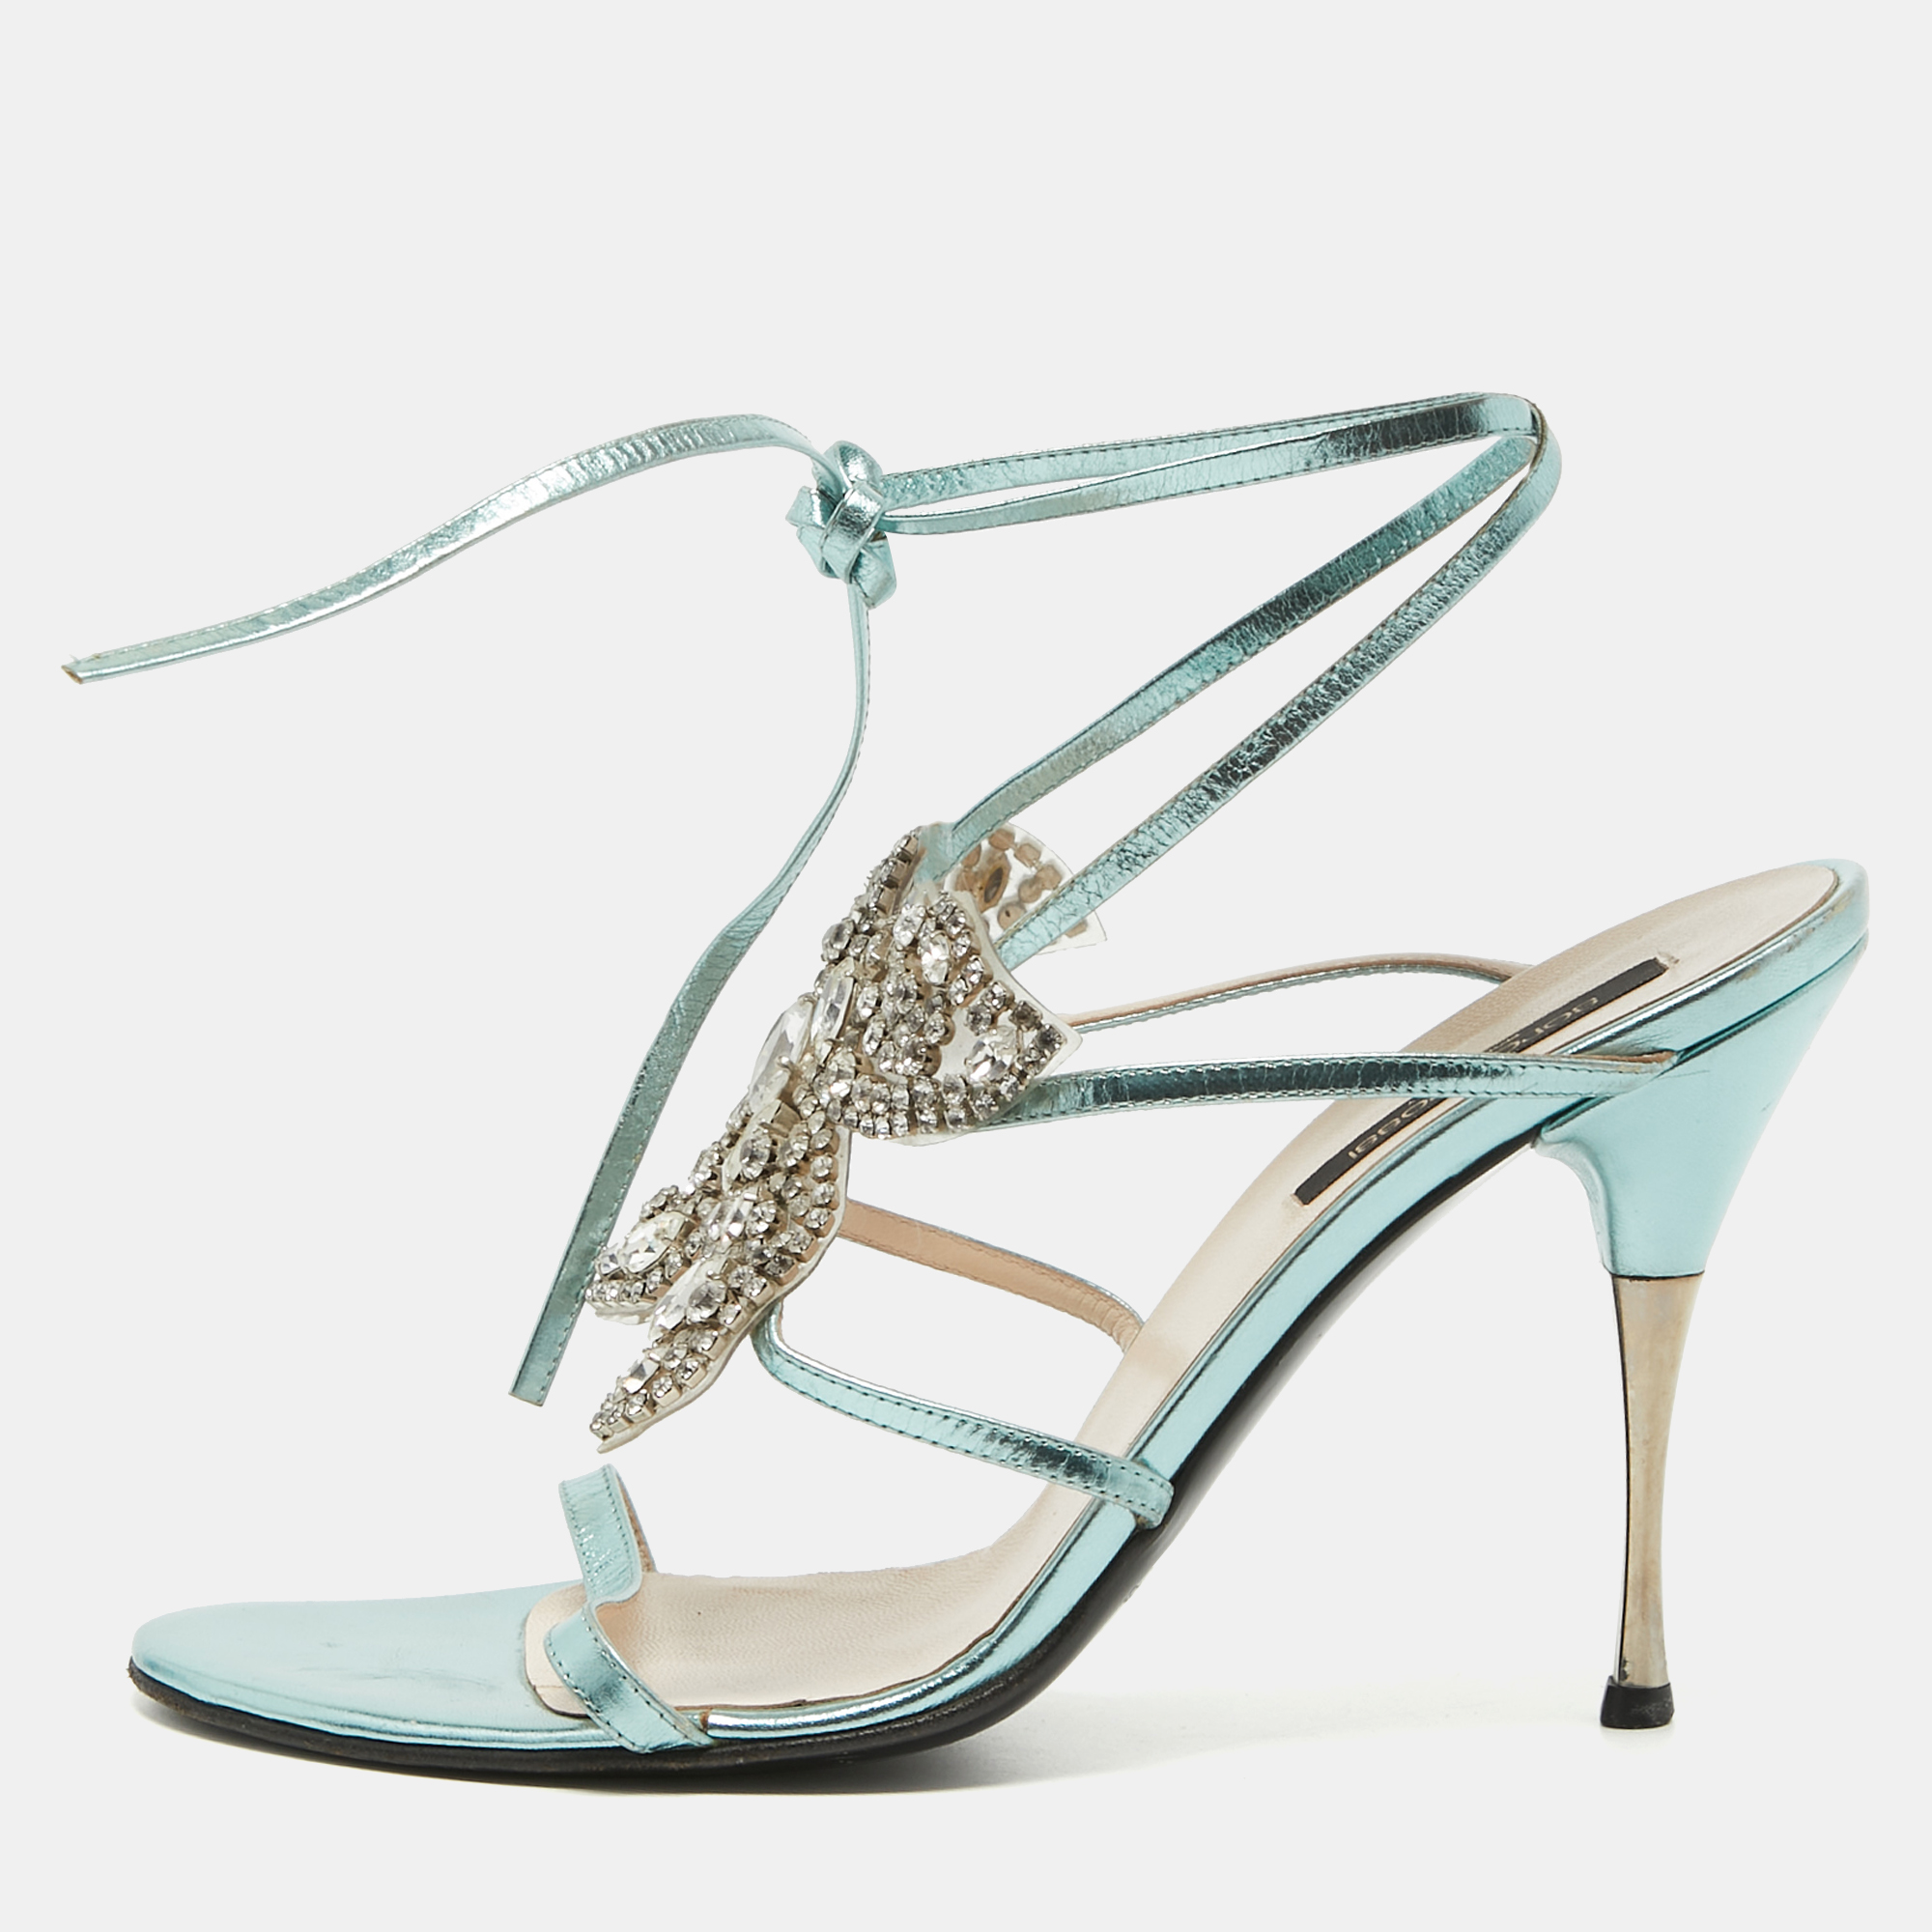 Pre-owned Sergio Rossi Metallic Green Leather And Pvc Crystal Embellished Ankle Wrap Sandals Size 40.5